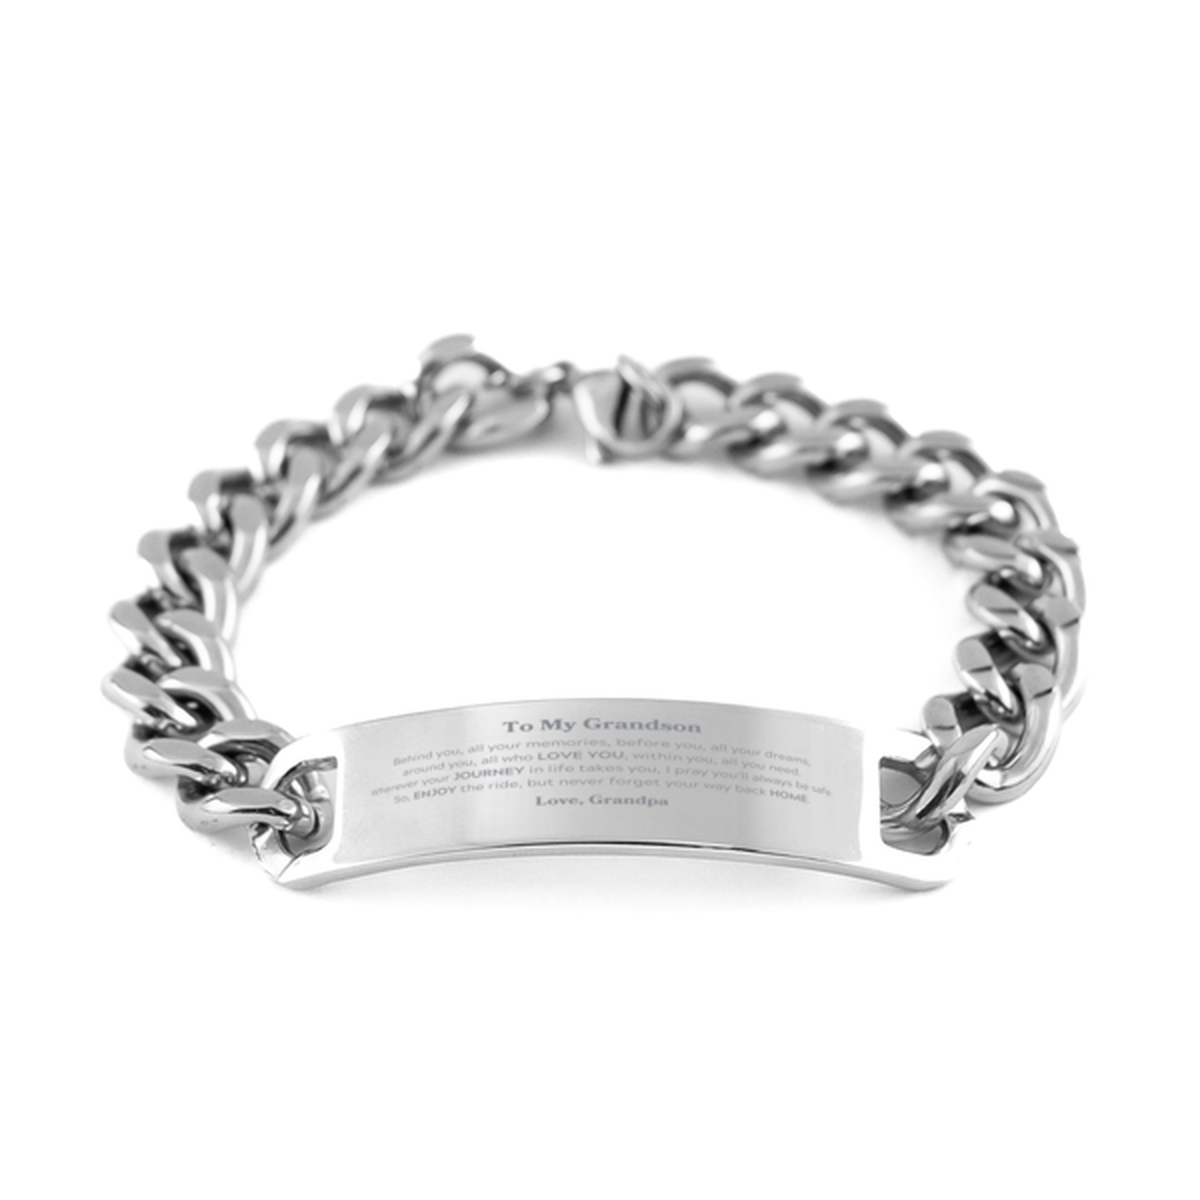 To My Grandson Graduation Gifts from Grandpa, Grandson Cuban Chain Stainless Steel Bracelet Christmas Birthday Gifts for Grandson Behind you, all your memories, before you, all your dreams. Love, Grandpa